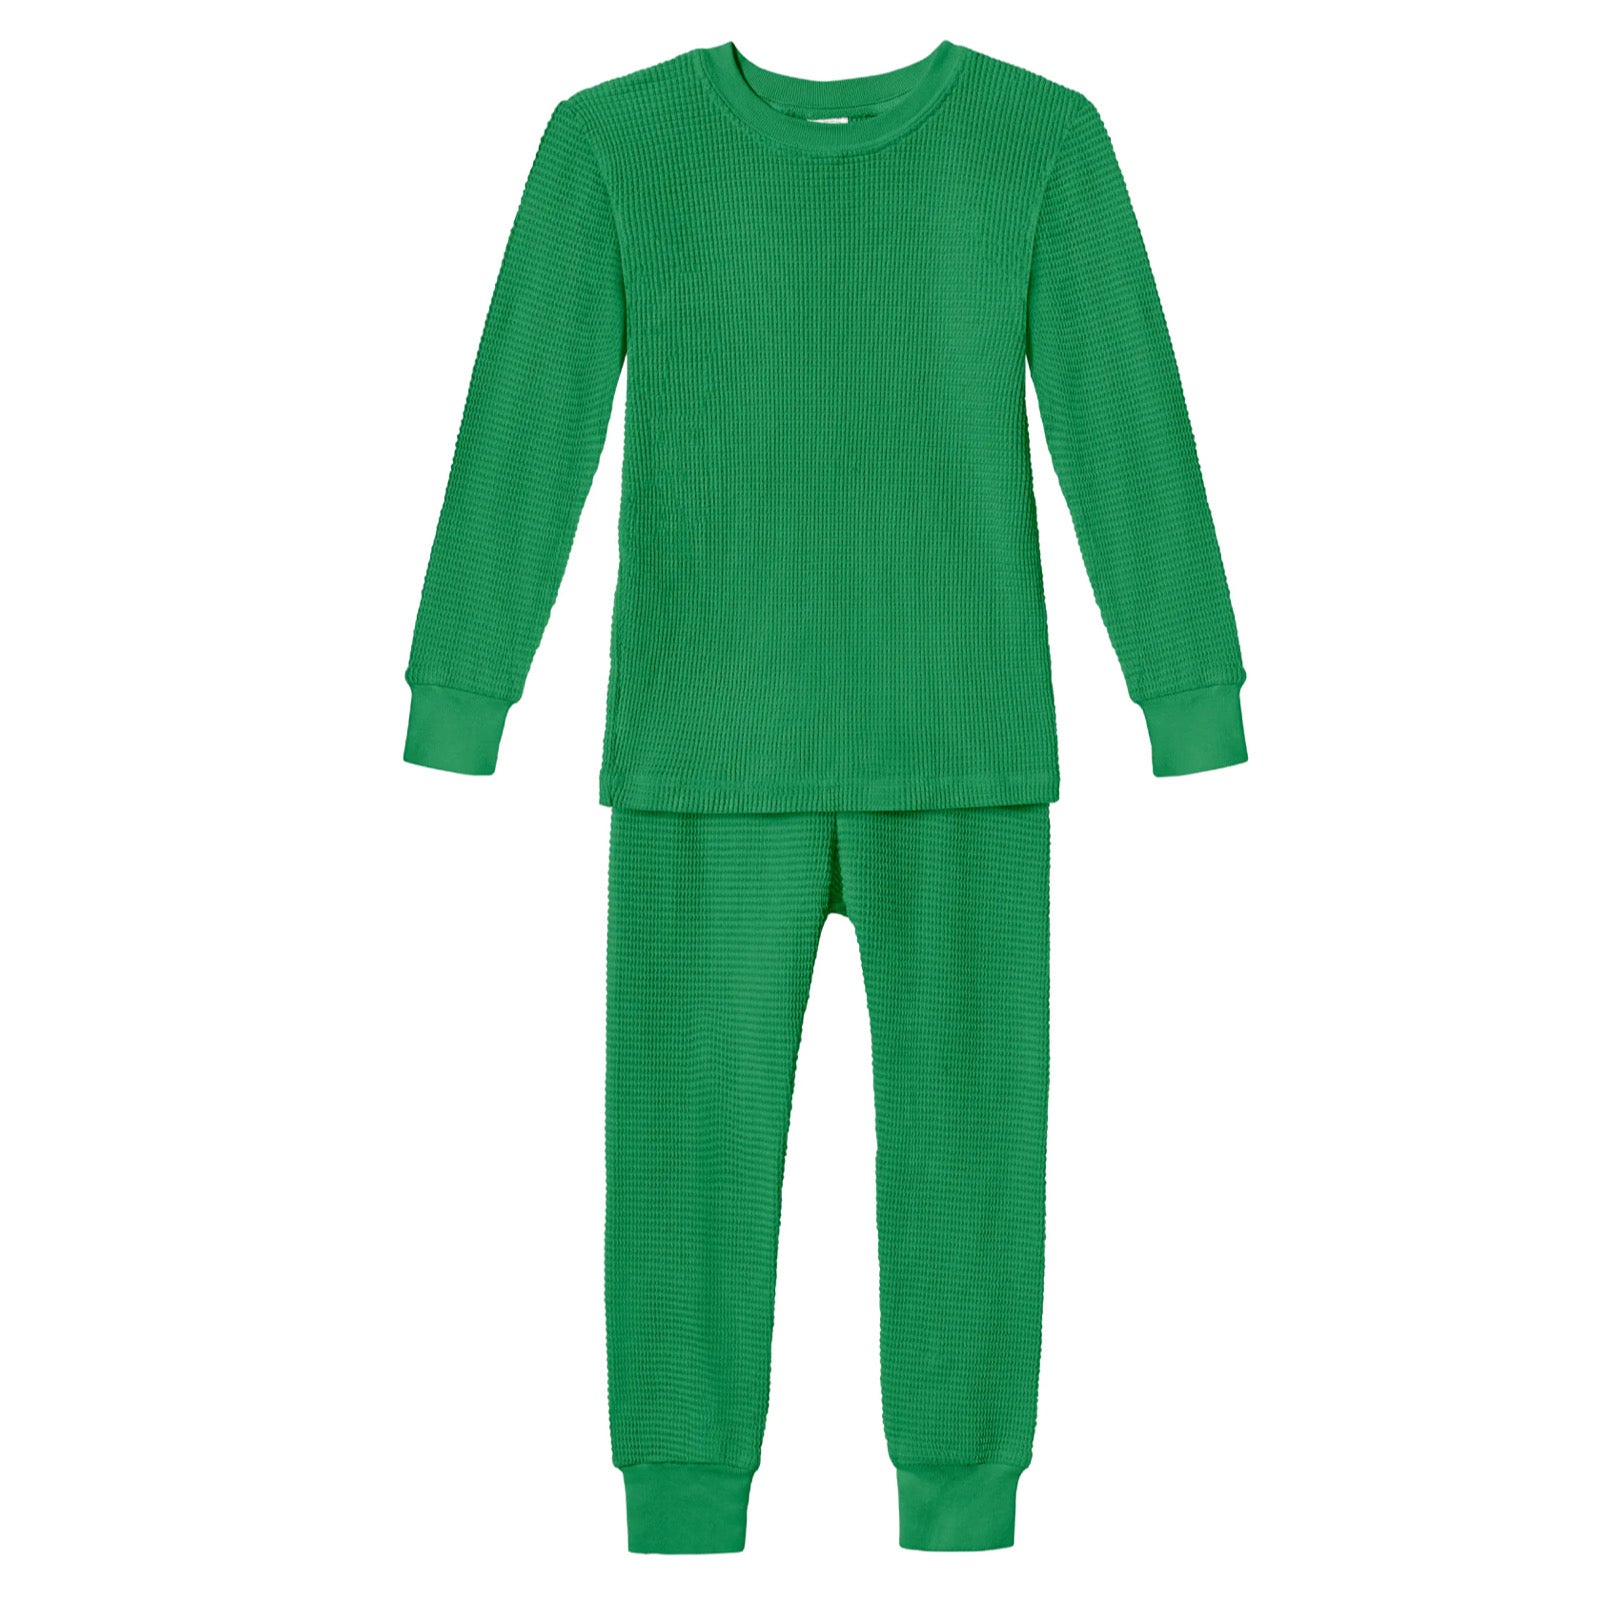 100% Cotton Thermal Long John Set for Toddlers, Made in USA